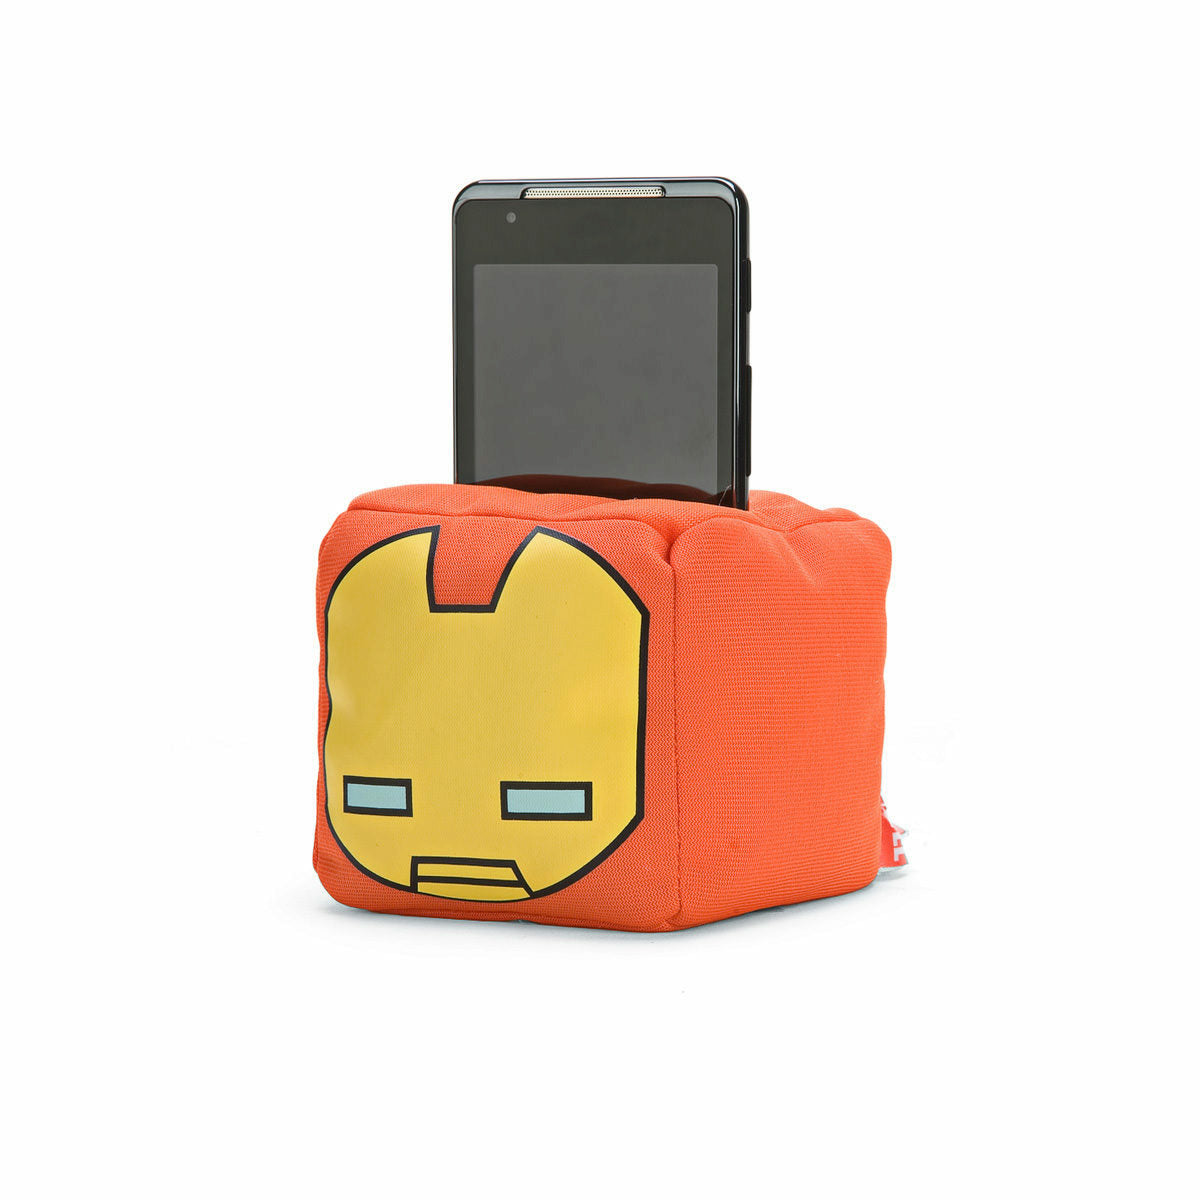 Marvel Kawaii Art Collection Cell Phone Charging Stand - Iron Man